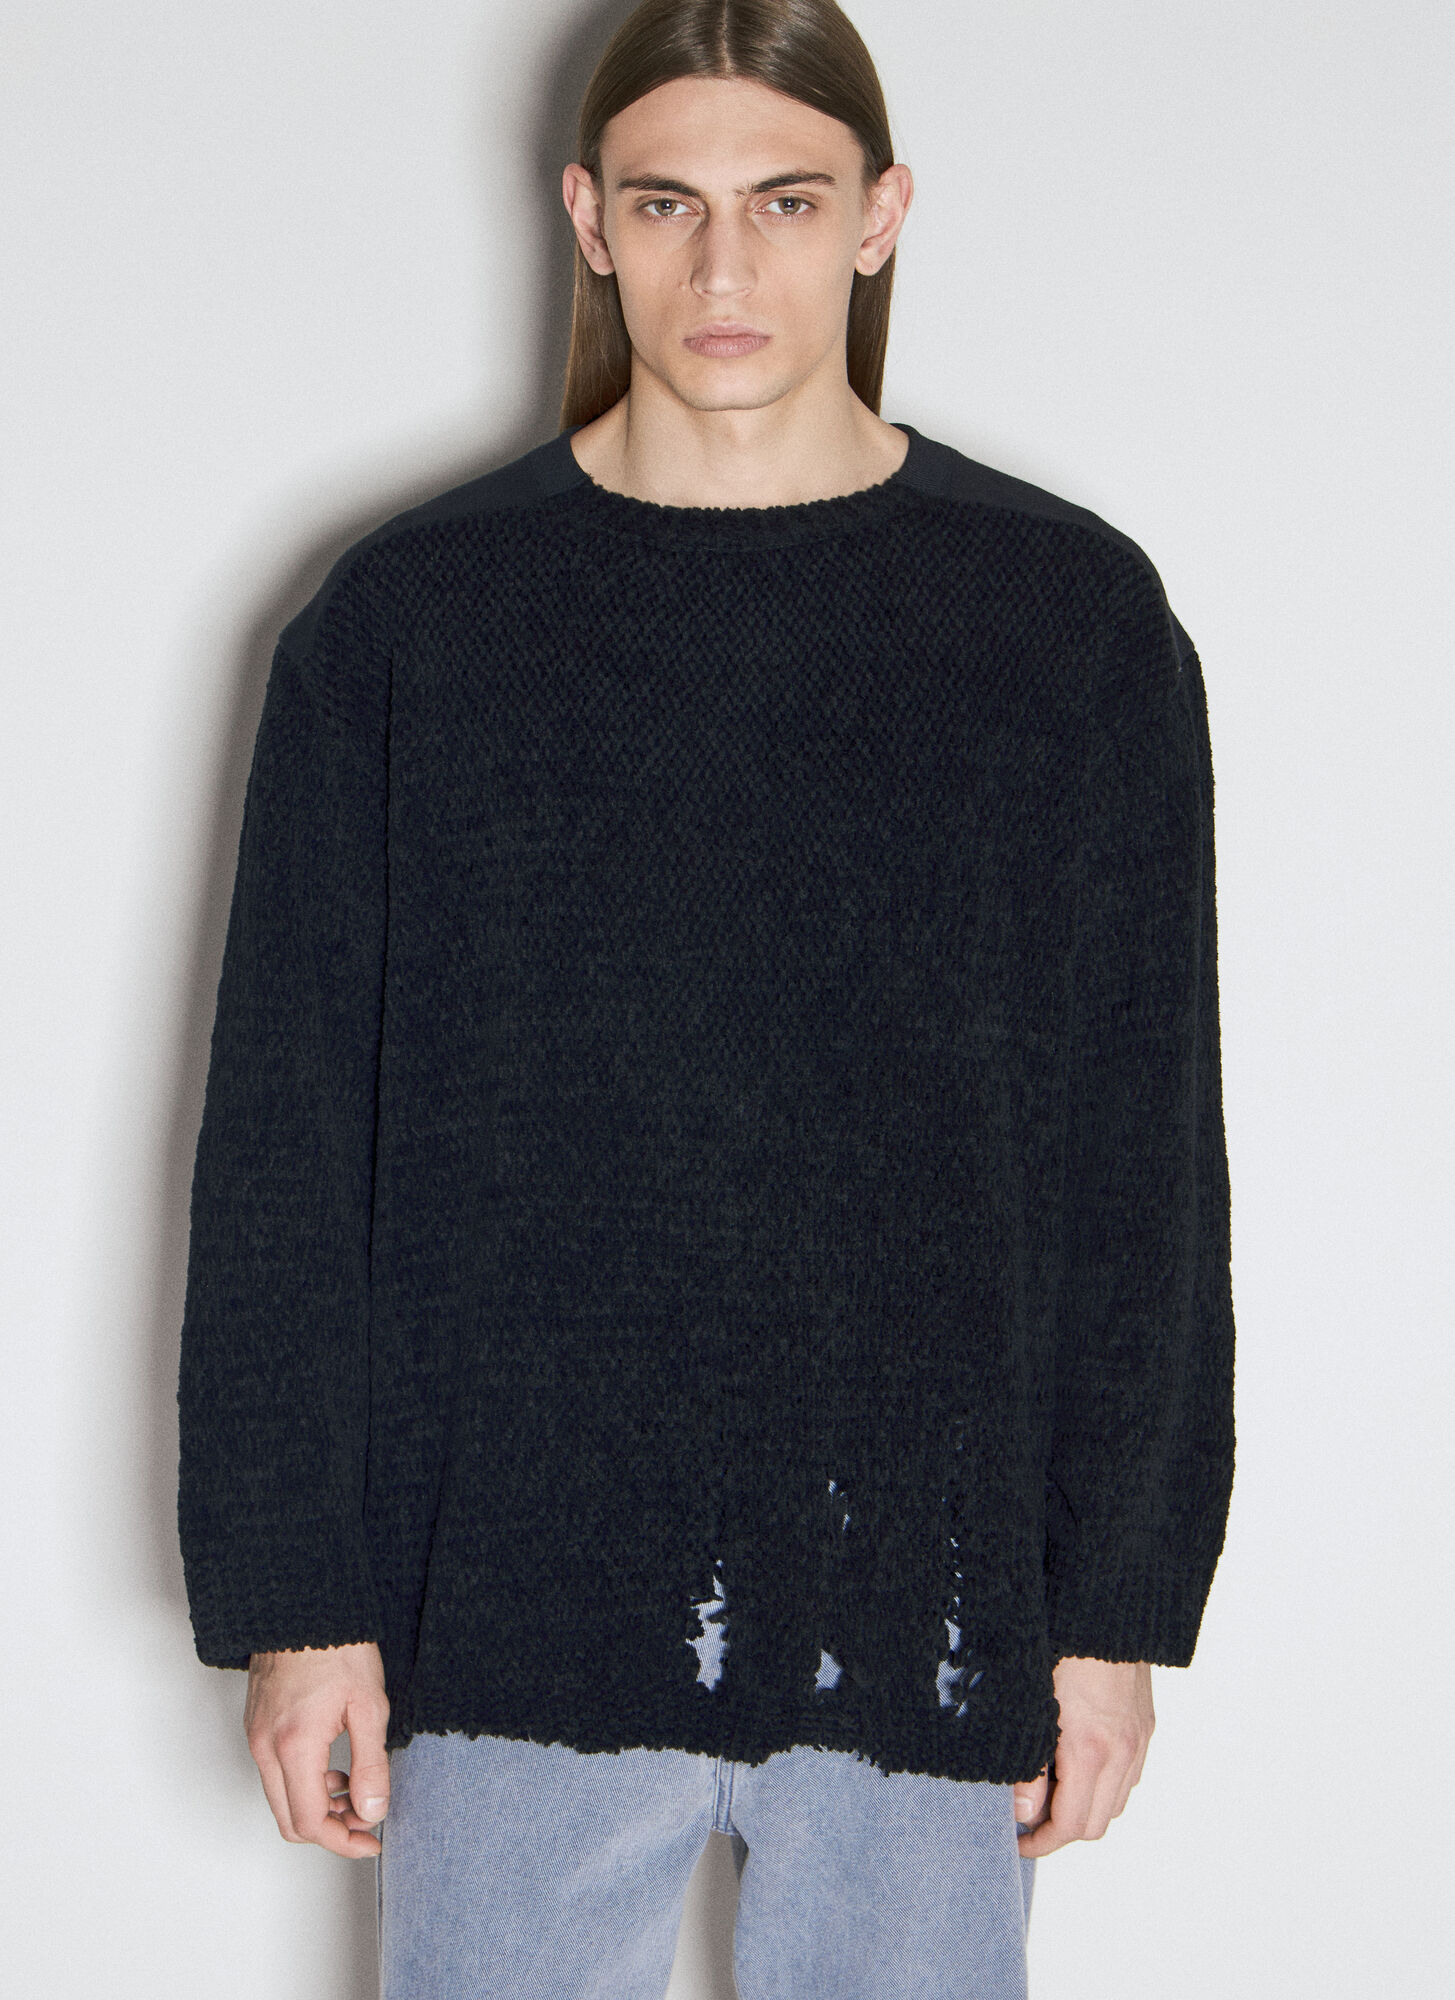 Undercover Distressed Wool Knit Jumper In Black